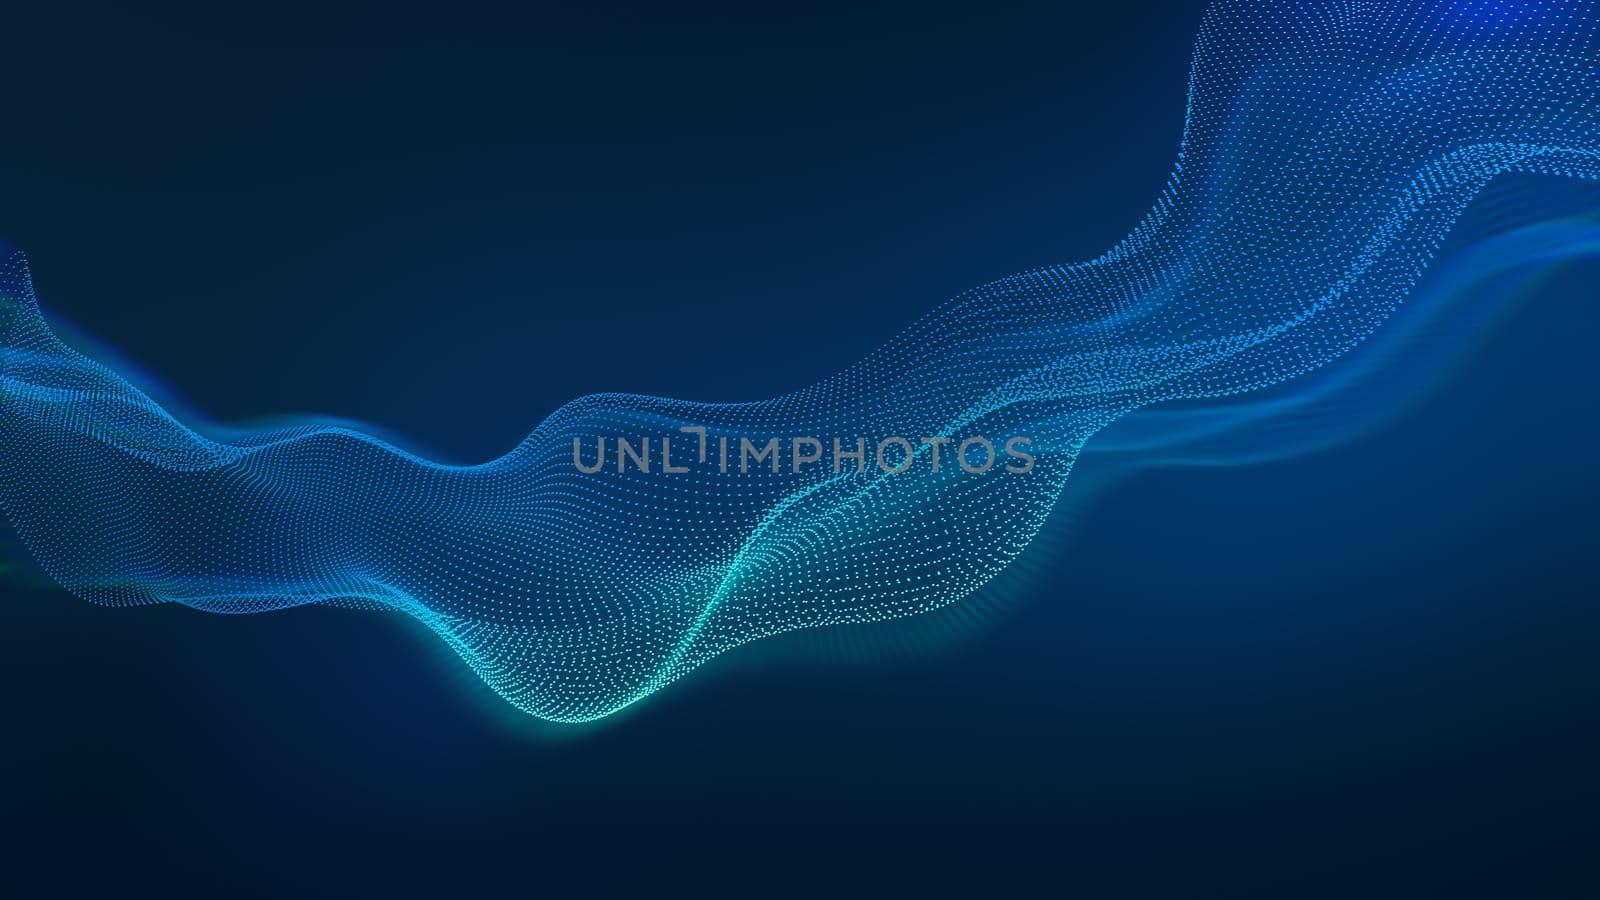 Beauty abstract wave technology background with blue led light. tech business concept. by ImagesRouges